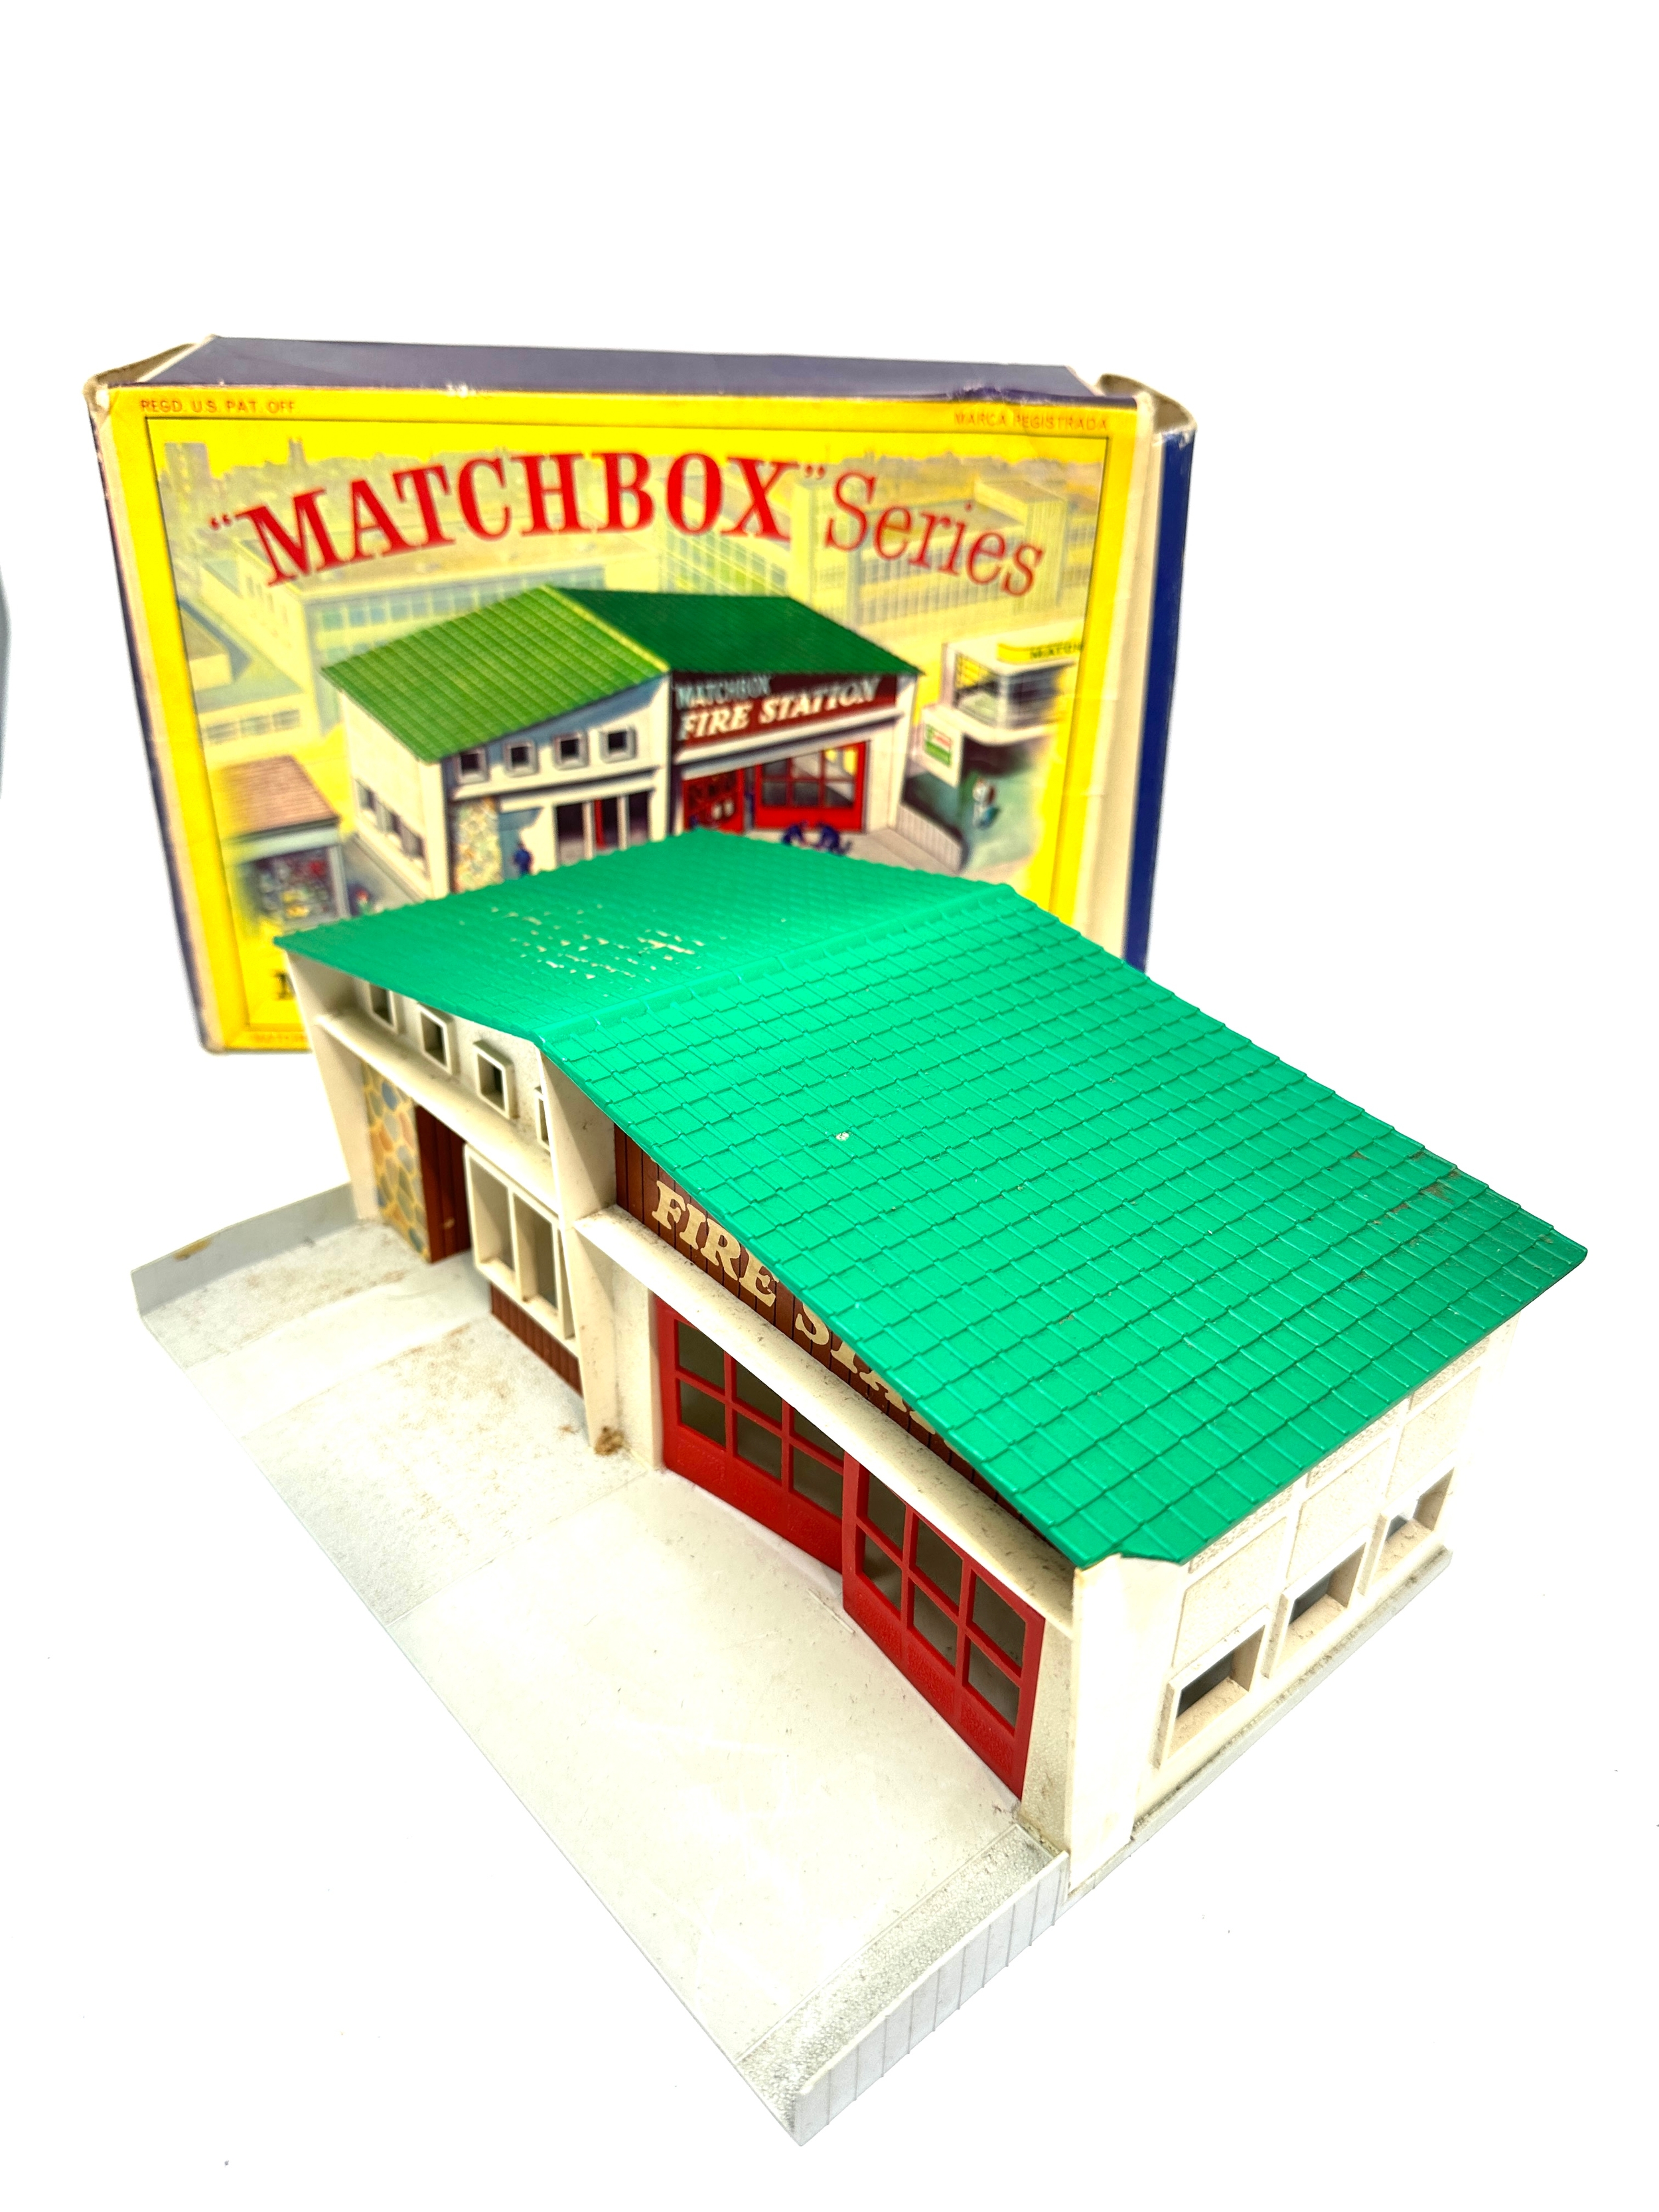 Original boxed Matchbox series MF-1 Fire Station - Image 2 of 4